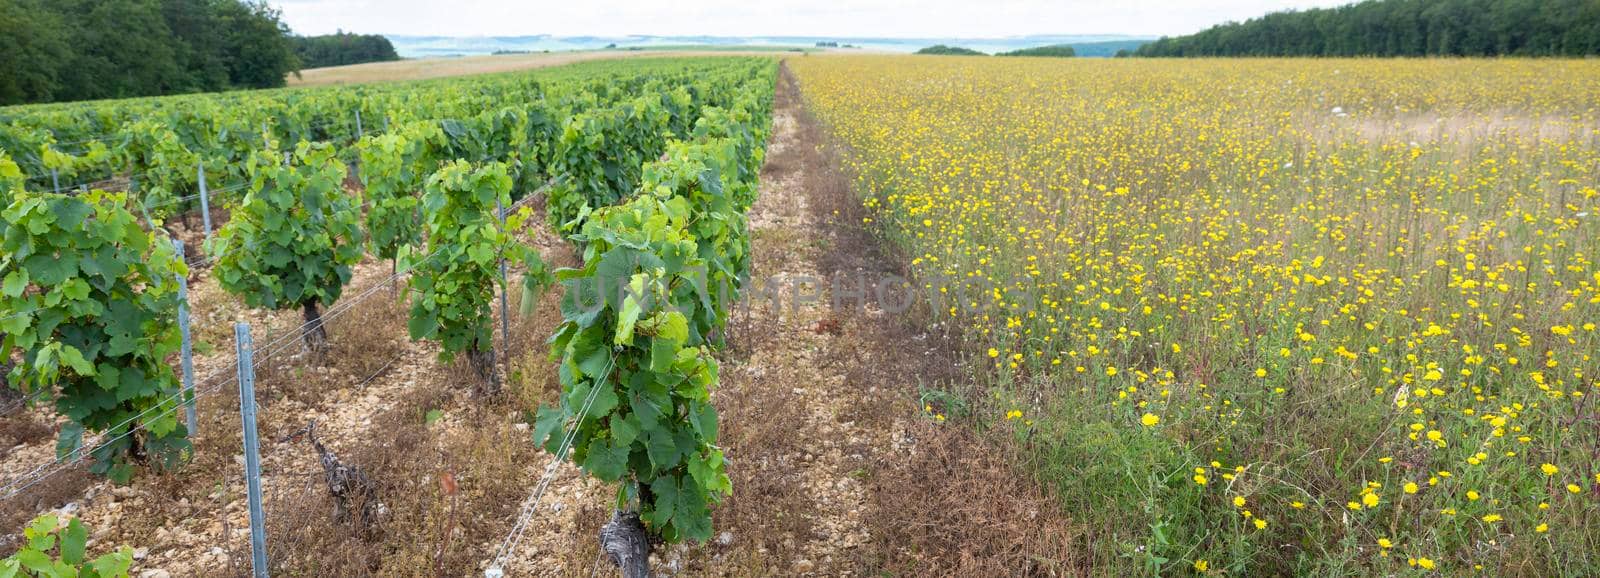 vines and summer flowers in french countryside of burgundy by ahavelaar